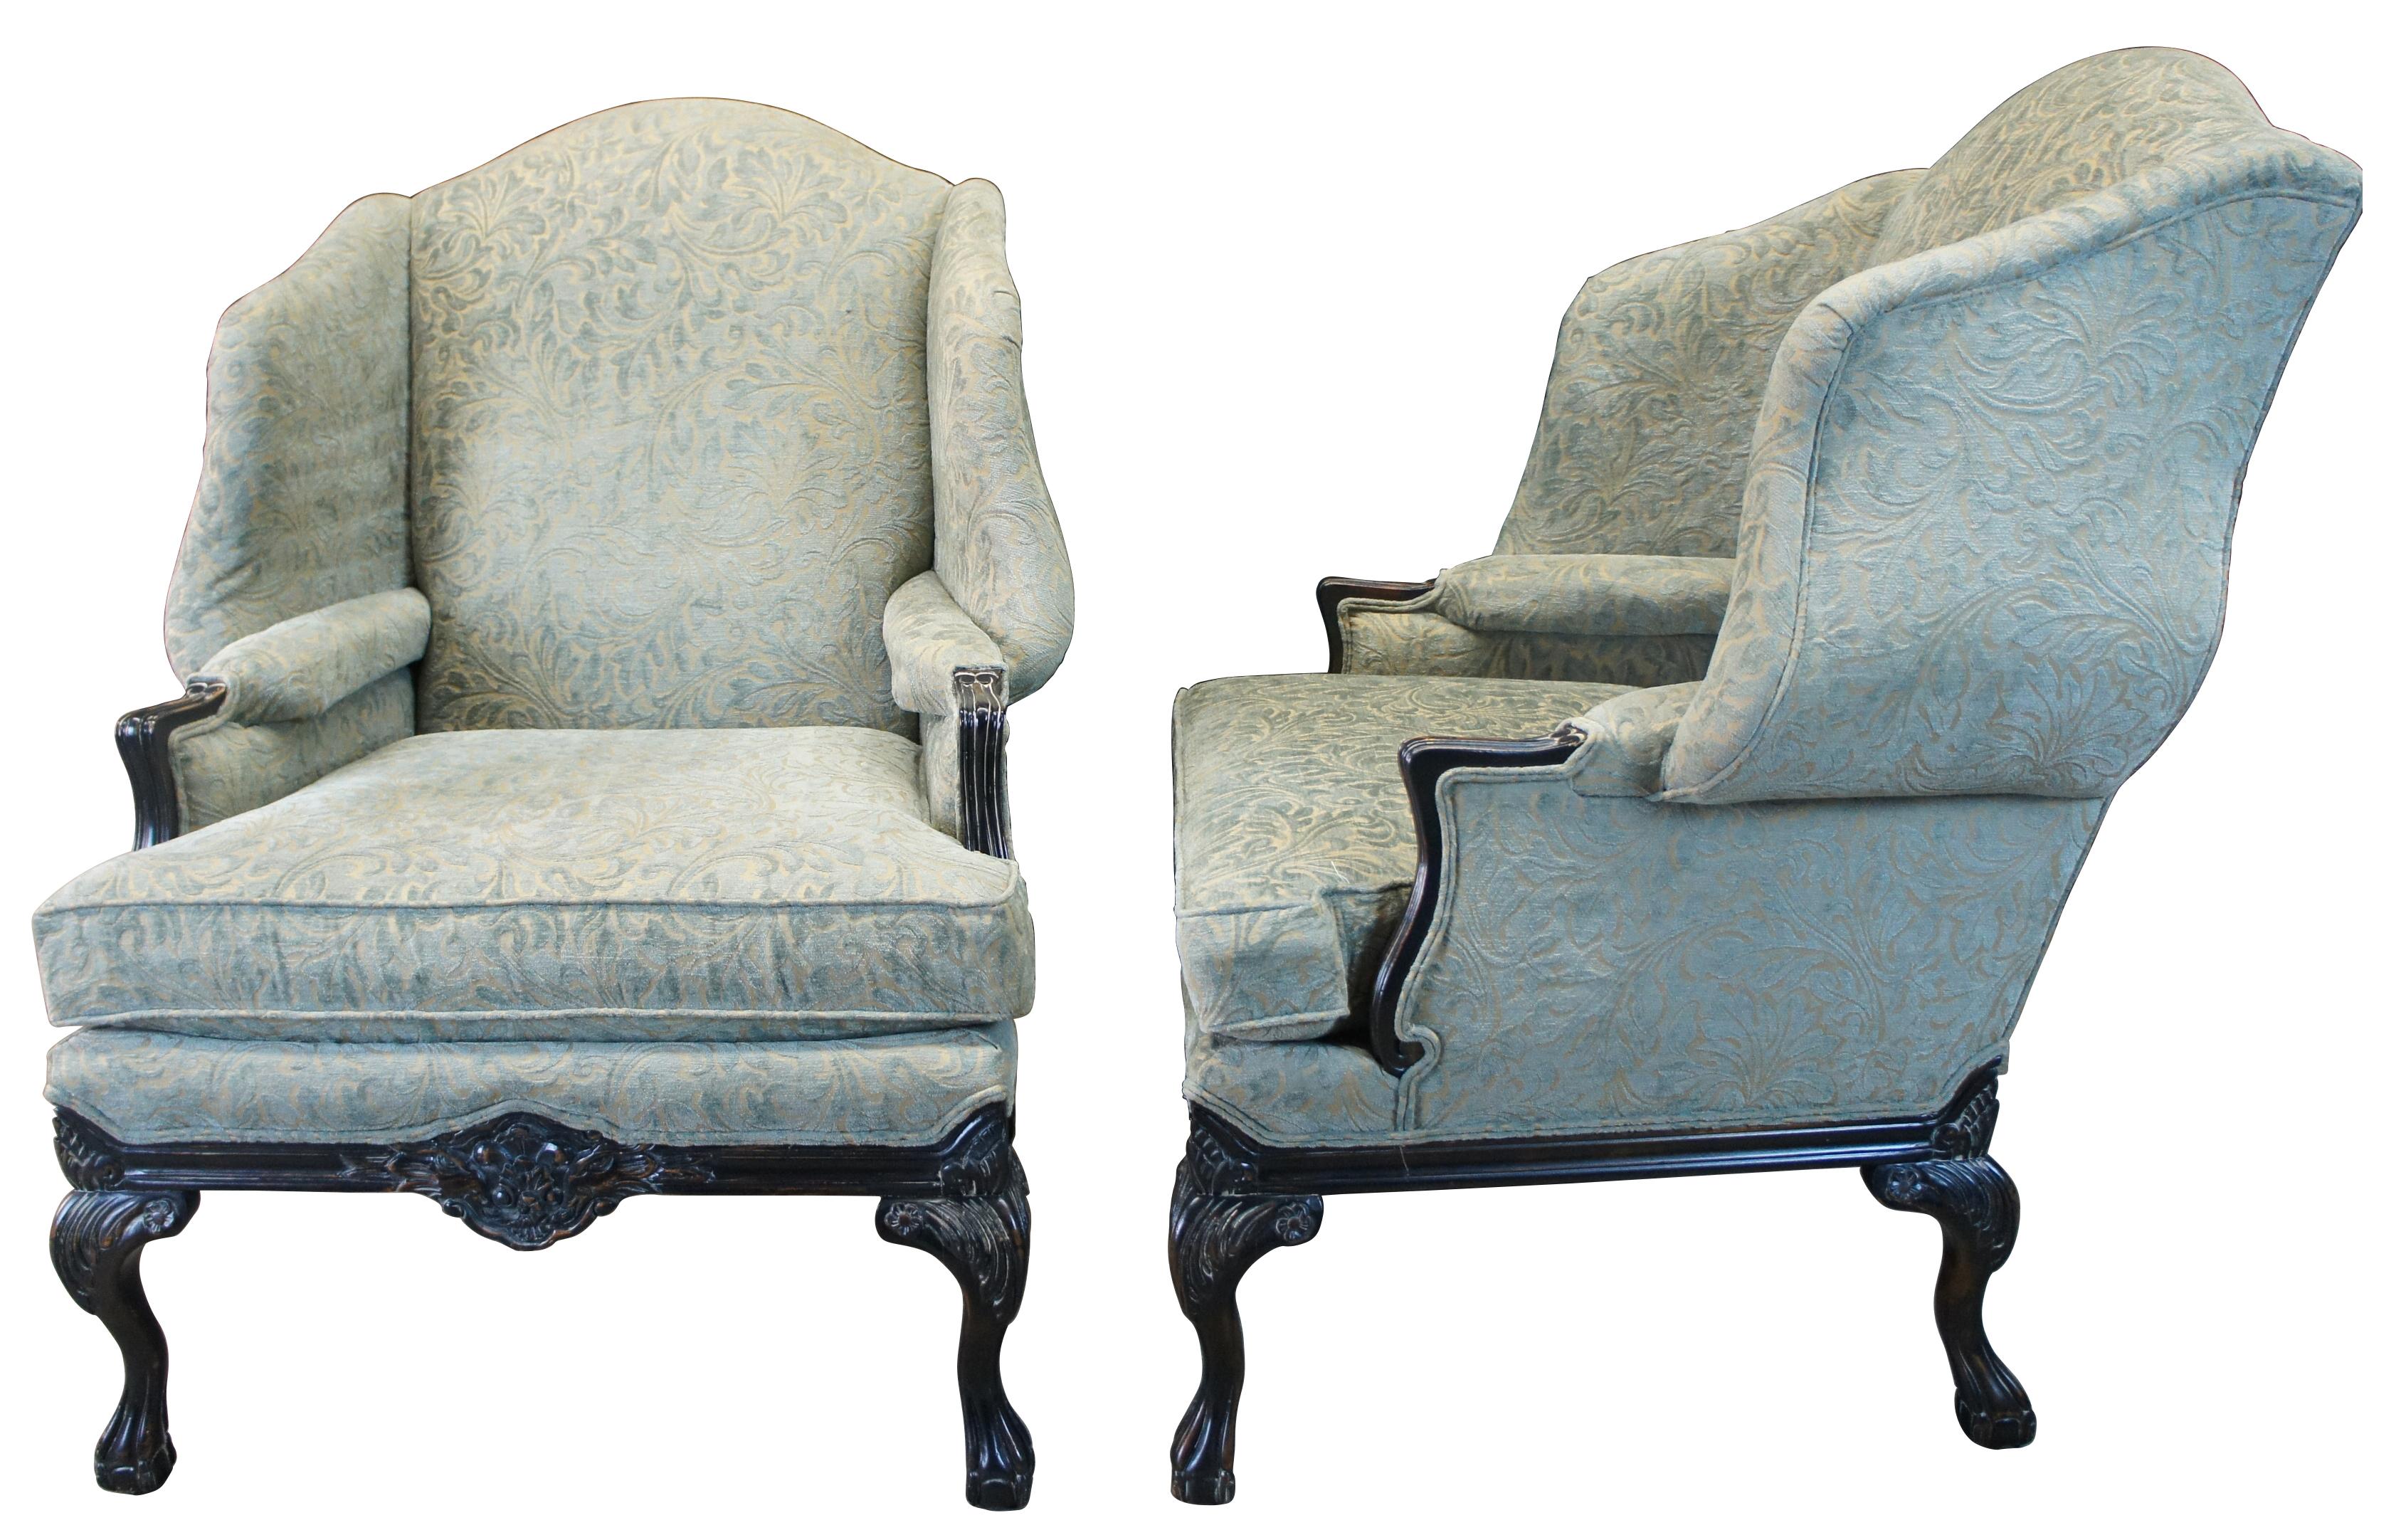 An exquisite pair of George III syle wingback chairs by Woodmark. Features a teal raised velvel floral upholstery and ebonized frame. Supported by cabriole legs leading to ball and claw feet. Includes ancathus and floral carved embellishments.